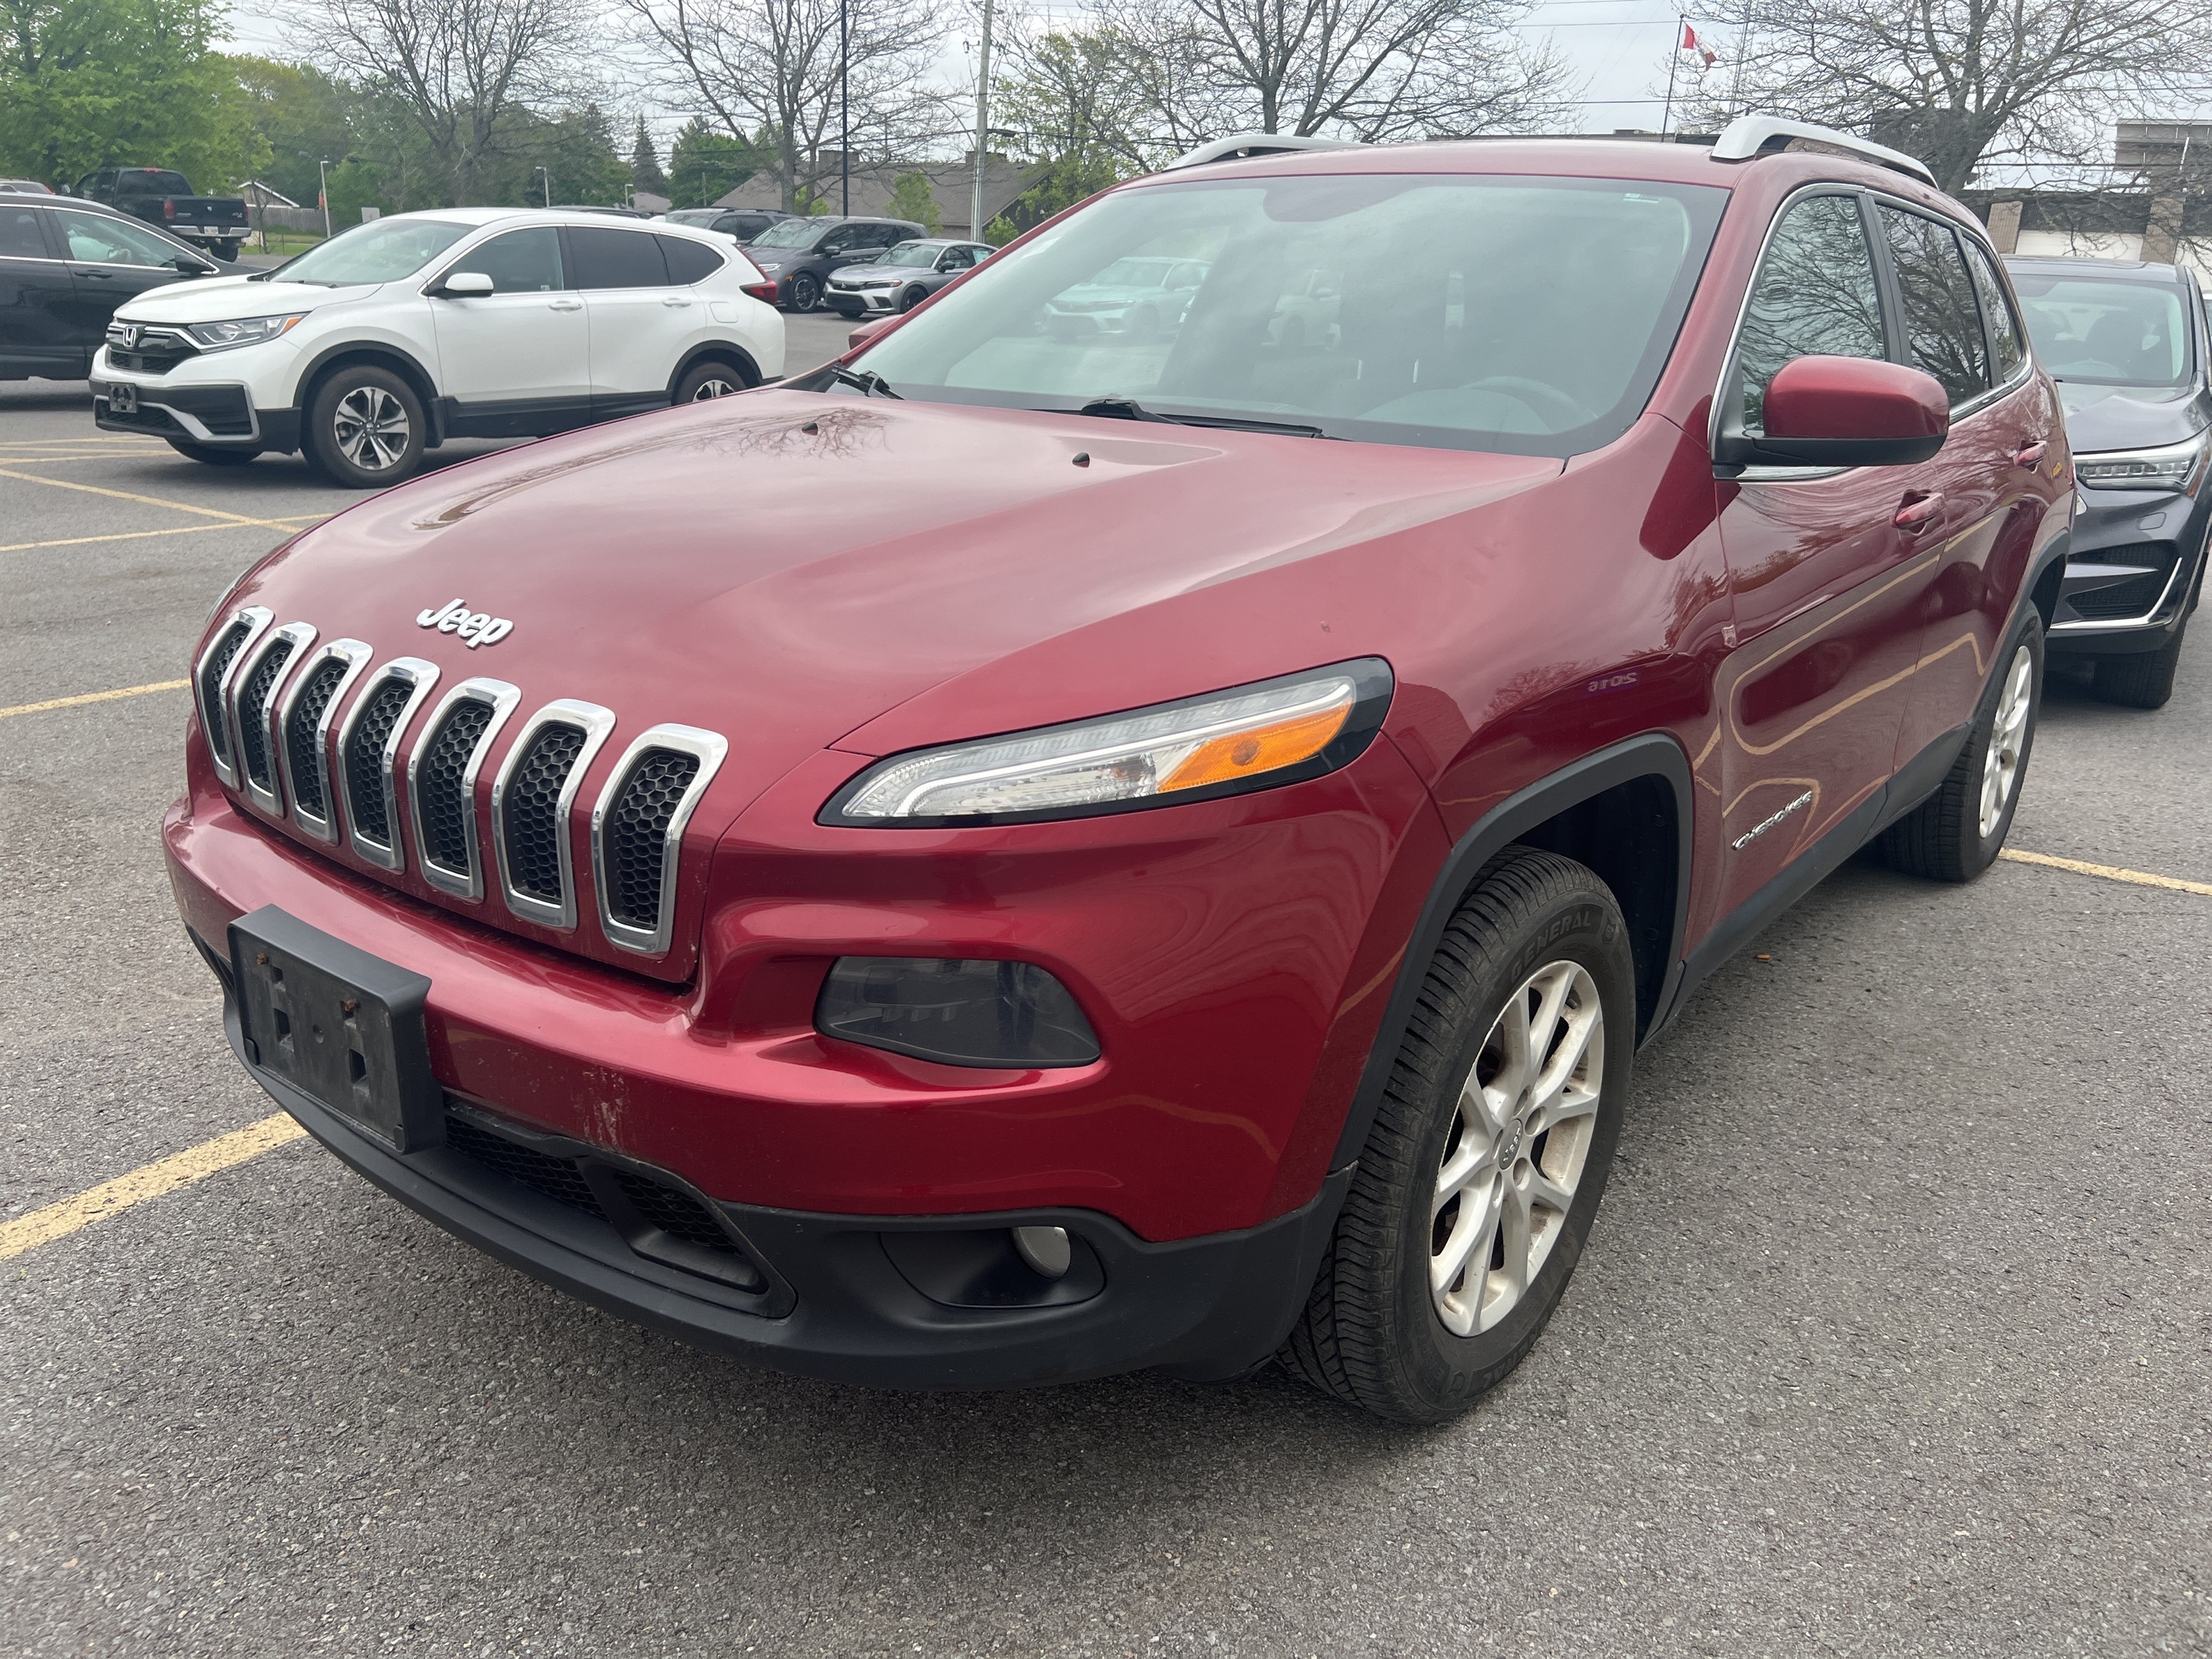 2014 Jeep Cherokee 4WD 4dr North